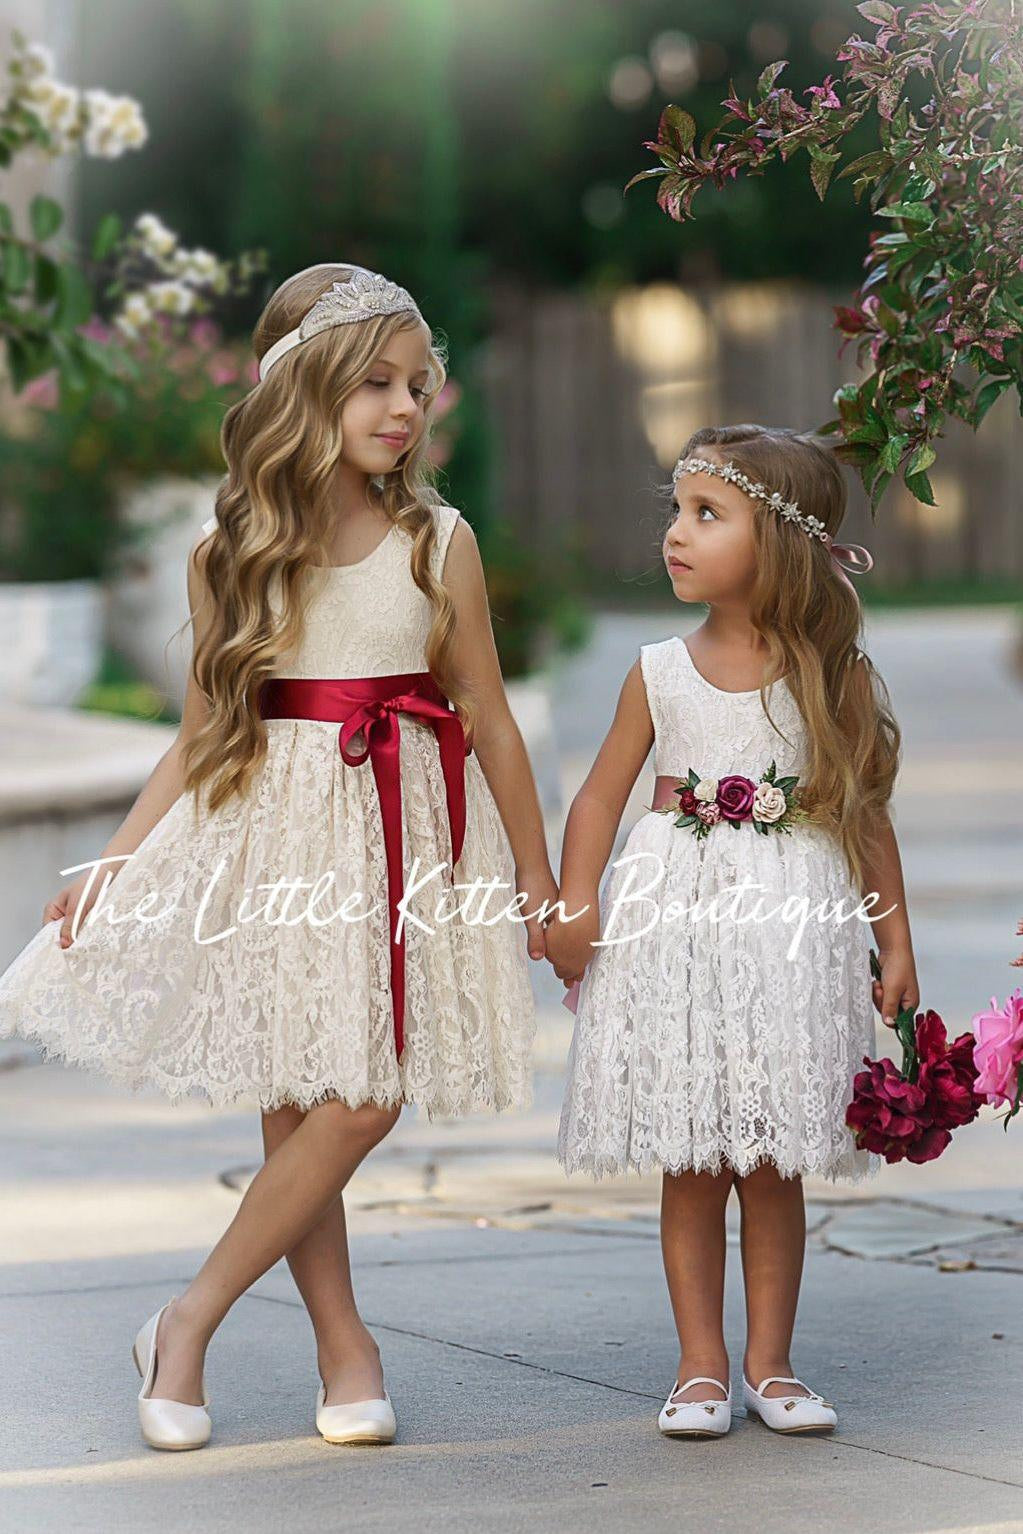 Antique Ivory and Off White Sleeveless Knee Length Lace Flower Girl Dresses - The Little Kitten Boutique